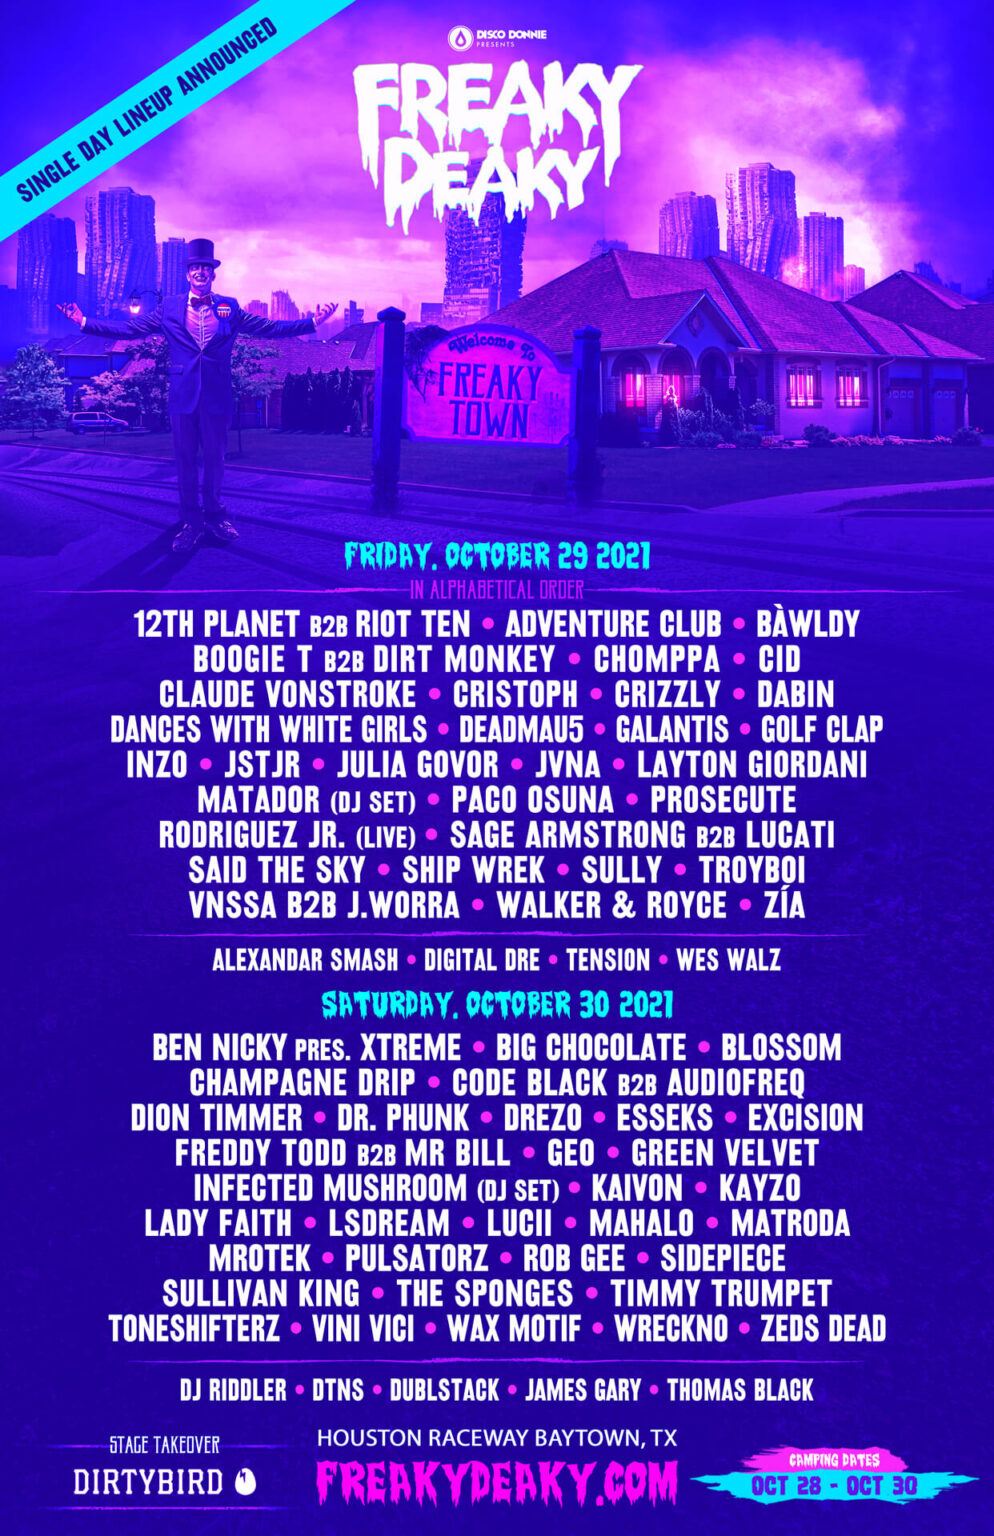 Freaky Deaky announces daily artist lineup, single day tickets now